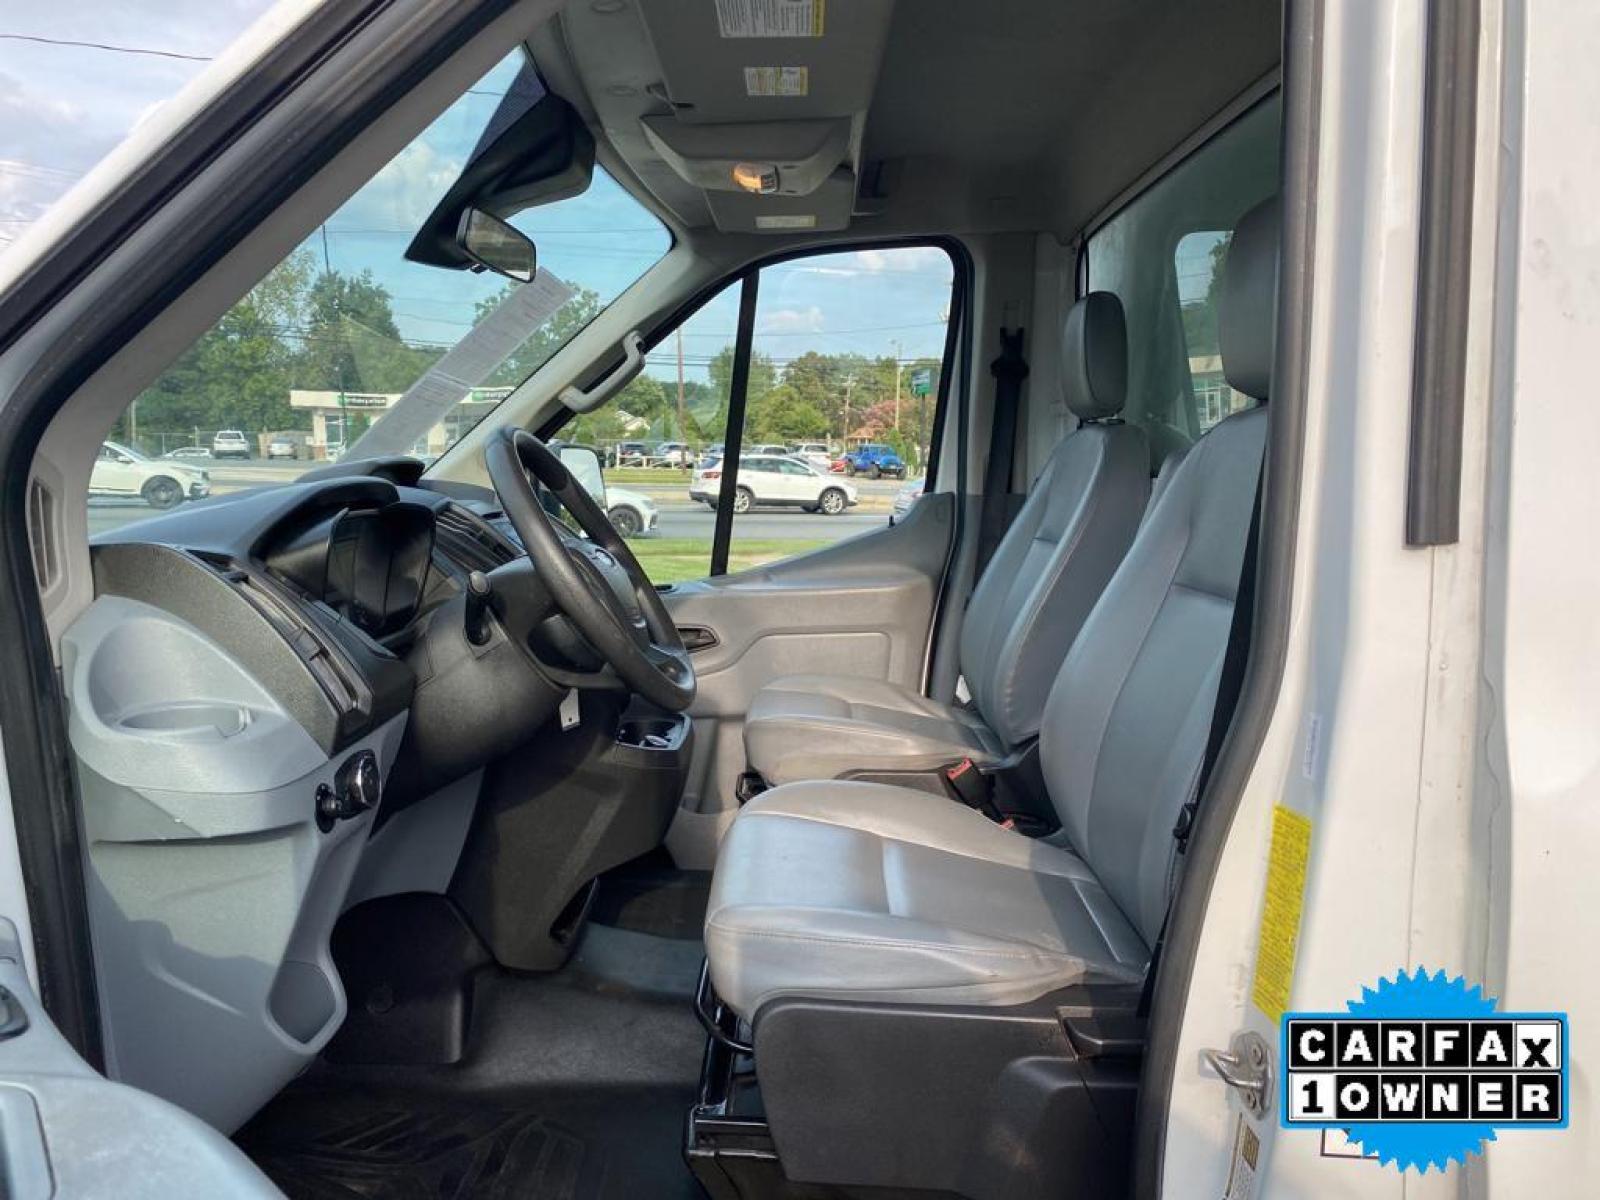 2018 Oxford White /Pewter Ford Transit Chassis Cab Base (1FDBF8ZM1JK) with an V6, 3.7L engine, 6-speed automatic transmission, located at 3147 E Independence Blvd, Charlotte, NC, 28205, 35.200268, -80.773651 - <b>Equipment</b><br>This model features a hands-free Bluetooth phone system. See what's behind you with the back up camera on this vehicle. This vehicle is a certified CARFAX 1-owner. It is rear wheel drive. This vehicle has a V6, 3.7L high output engine. This 1 ton van embodies class and sophistica - Photo #21